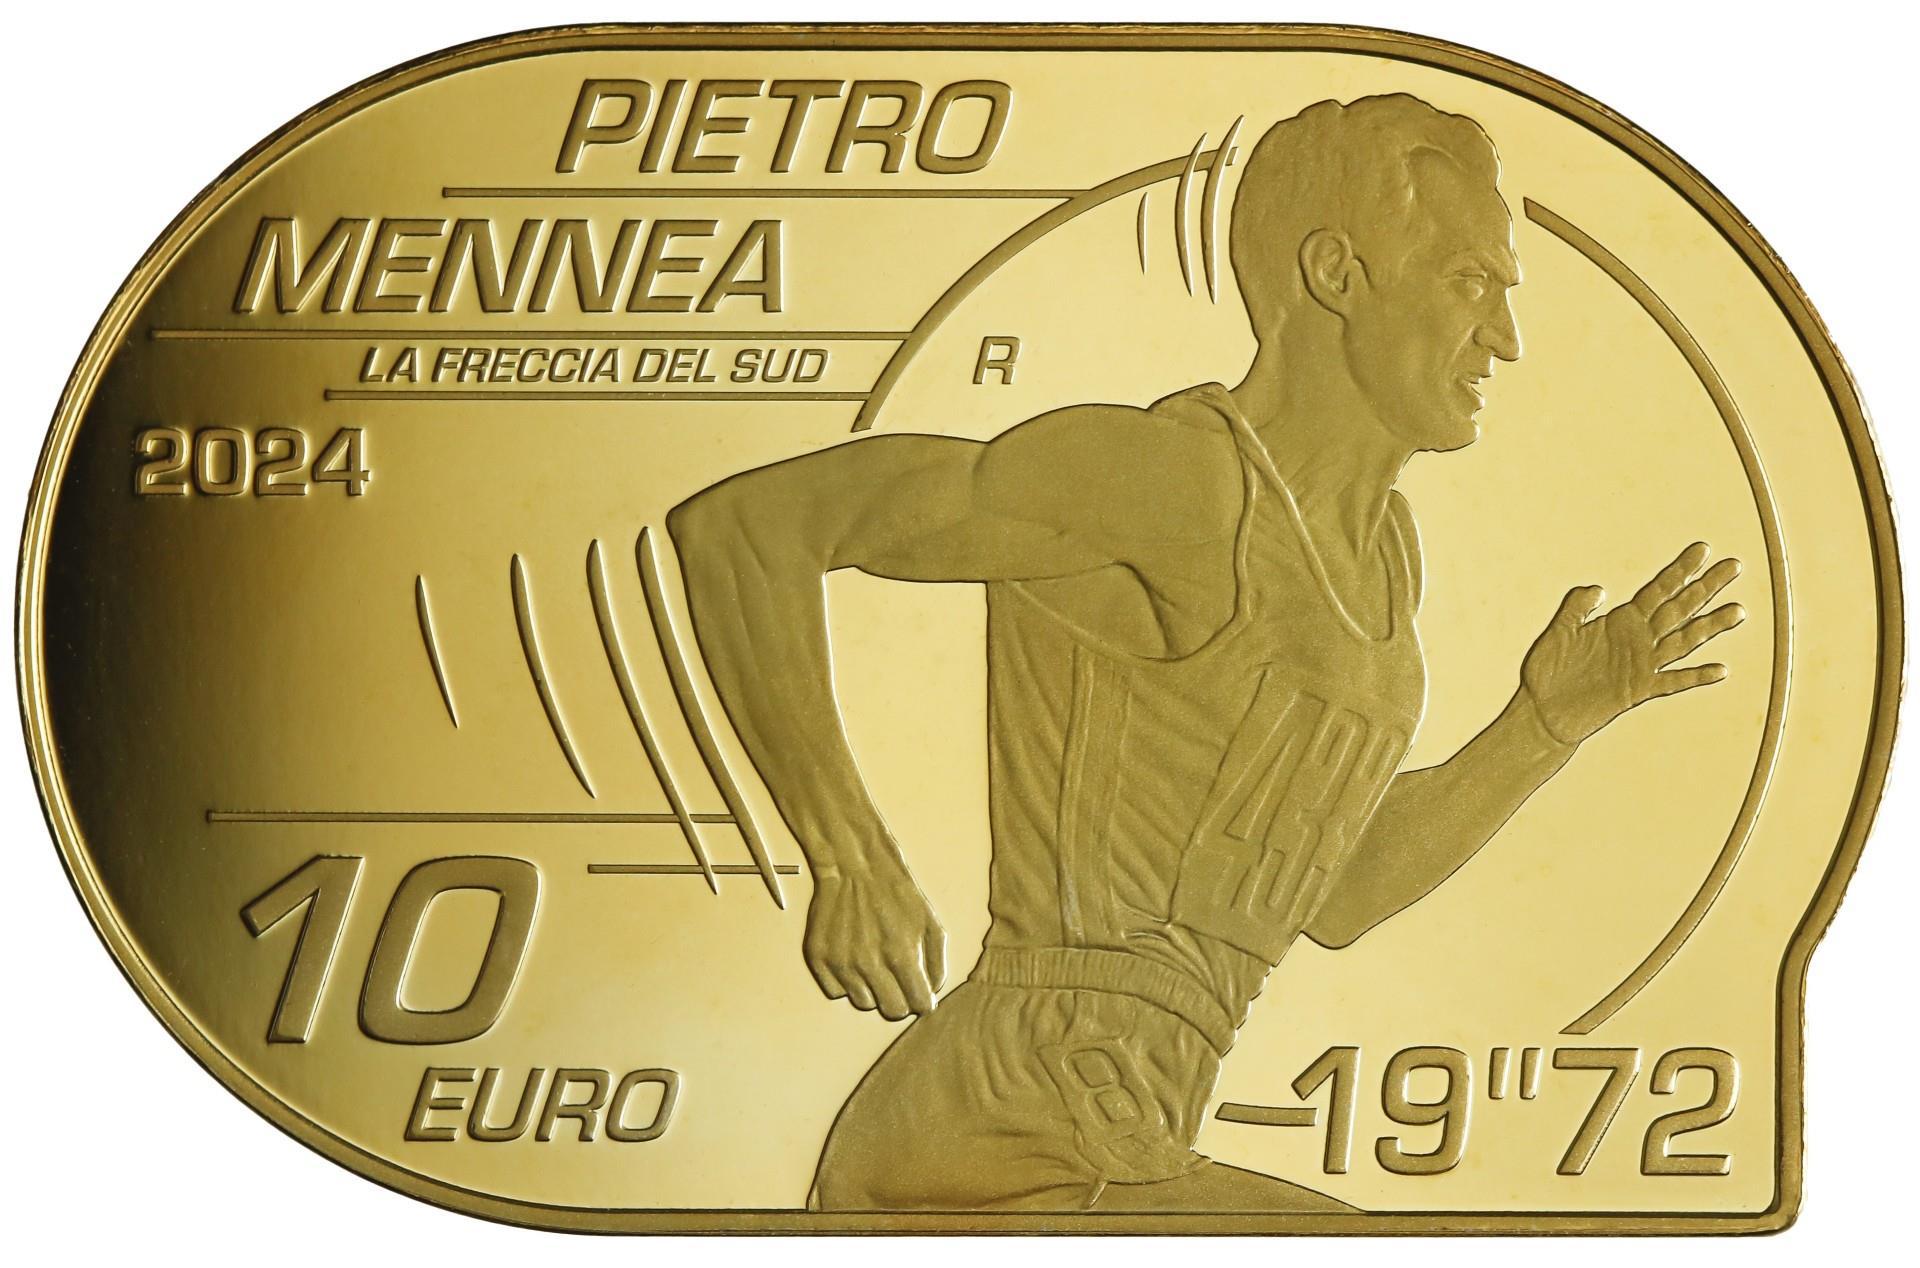 The coin dedicated to Mennea was presented in Barletta, a tribute to the athlete and the man